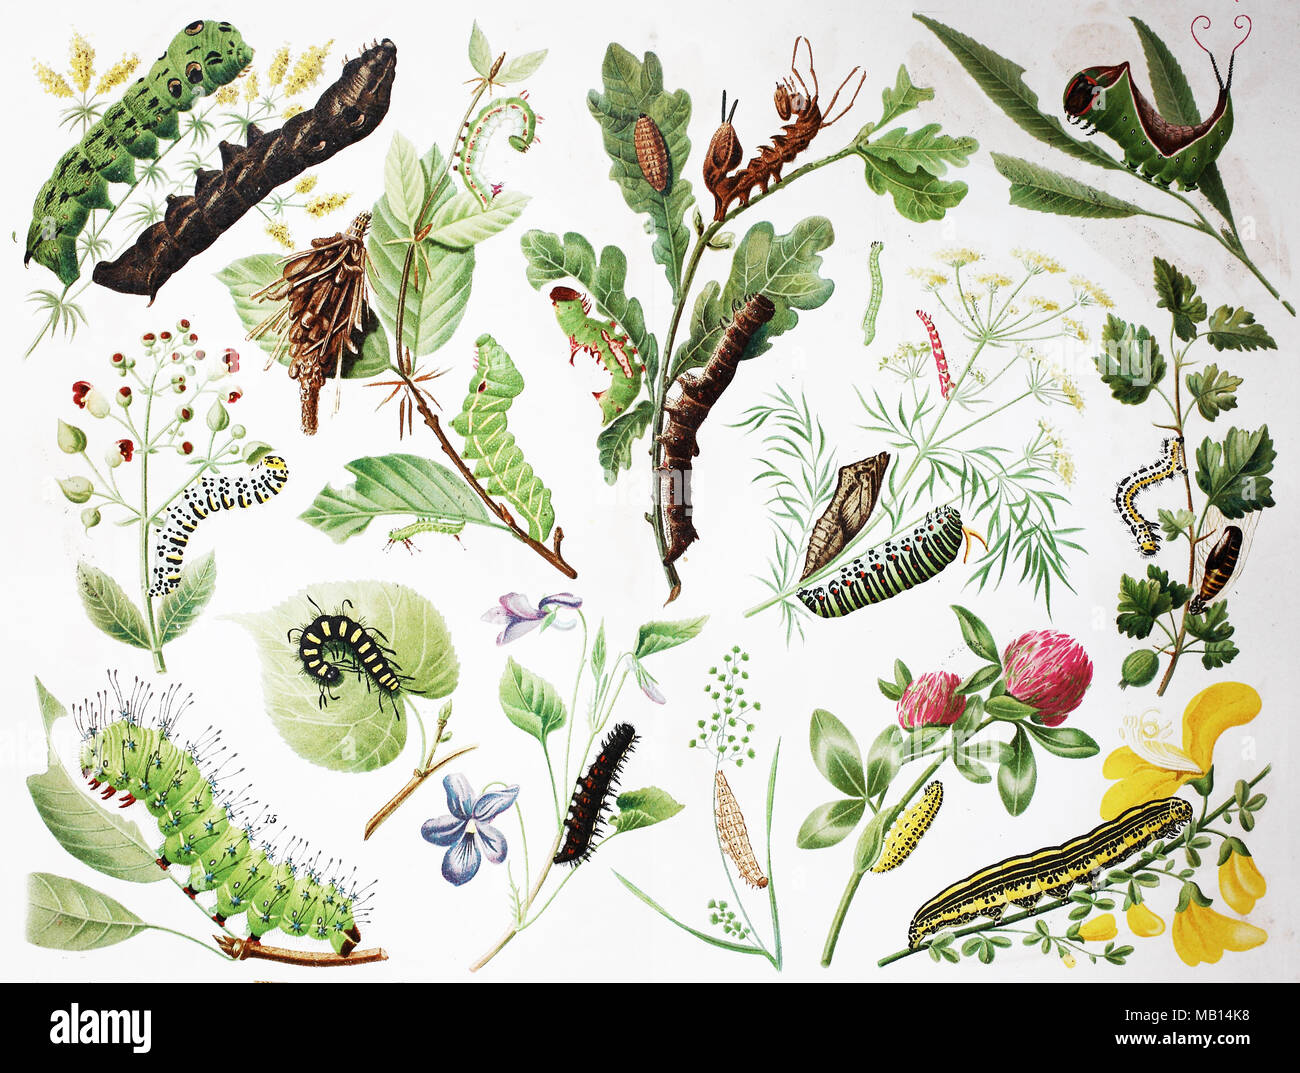 Ãœbersicht Ã¼ber Raupen, 1895, various Caterpillars, the larval stage of members of the order Lepidoptera, insect order comprising butterflies and moths, digital improved reproduction of an original print from the year 1895 Stock Photo